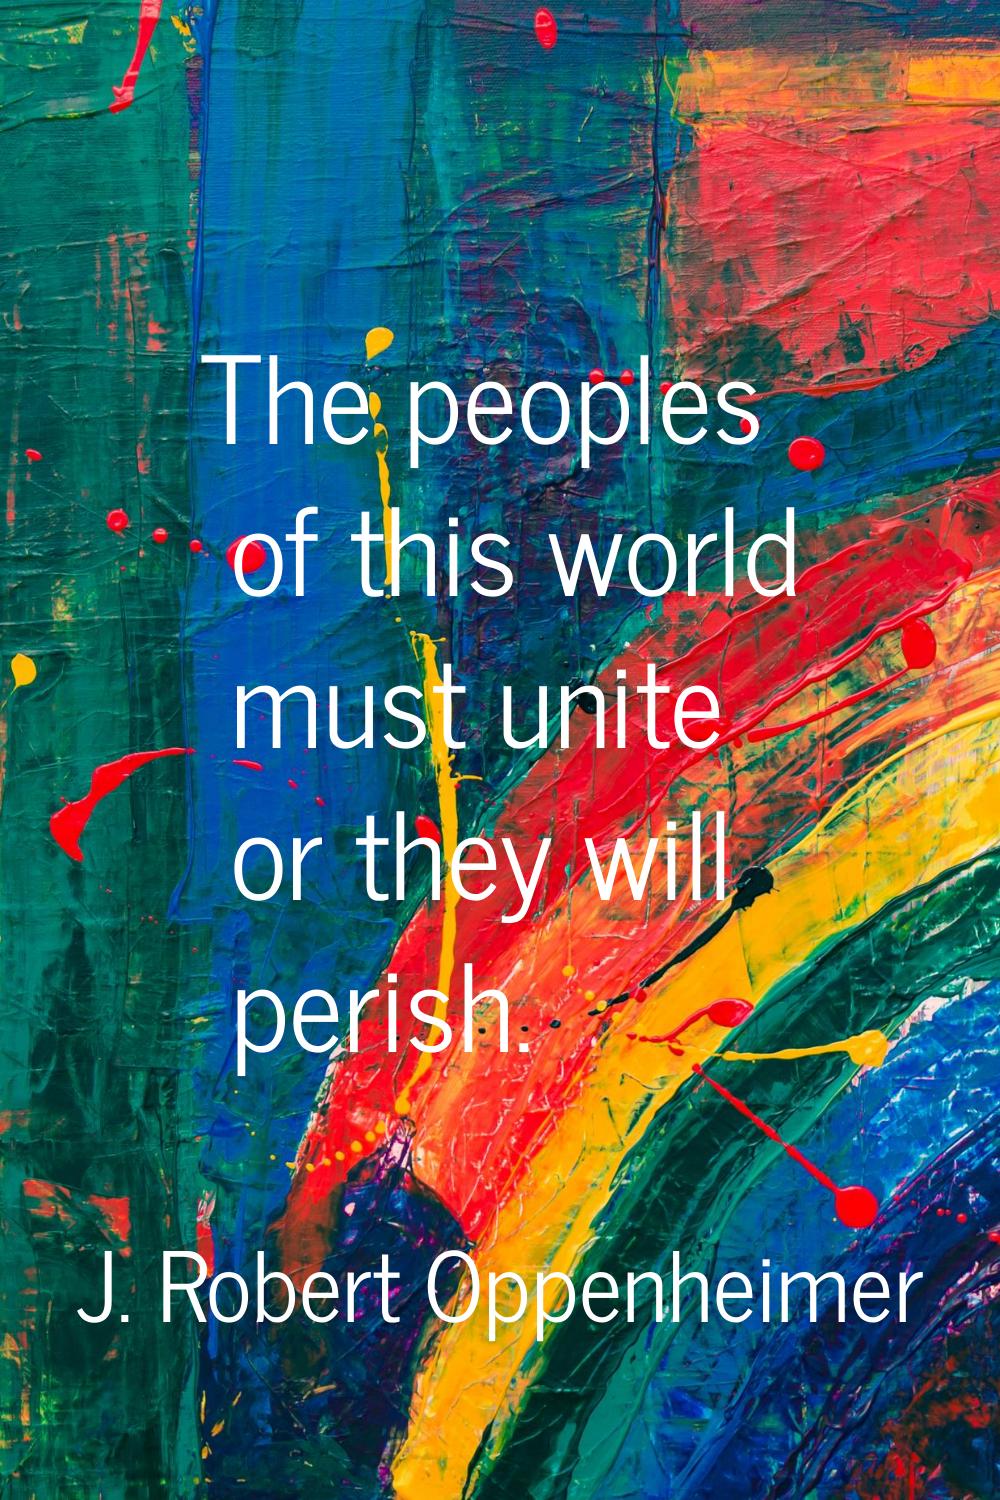 The peoples of this world must unite or they will perish.